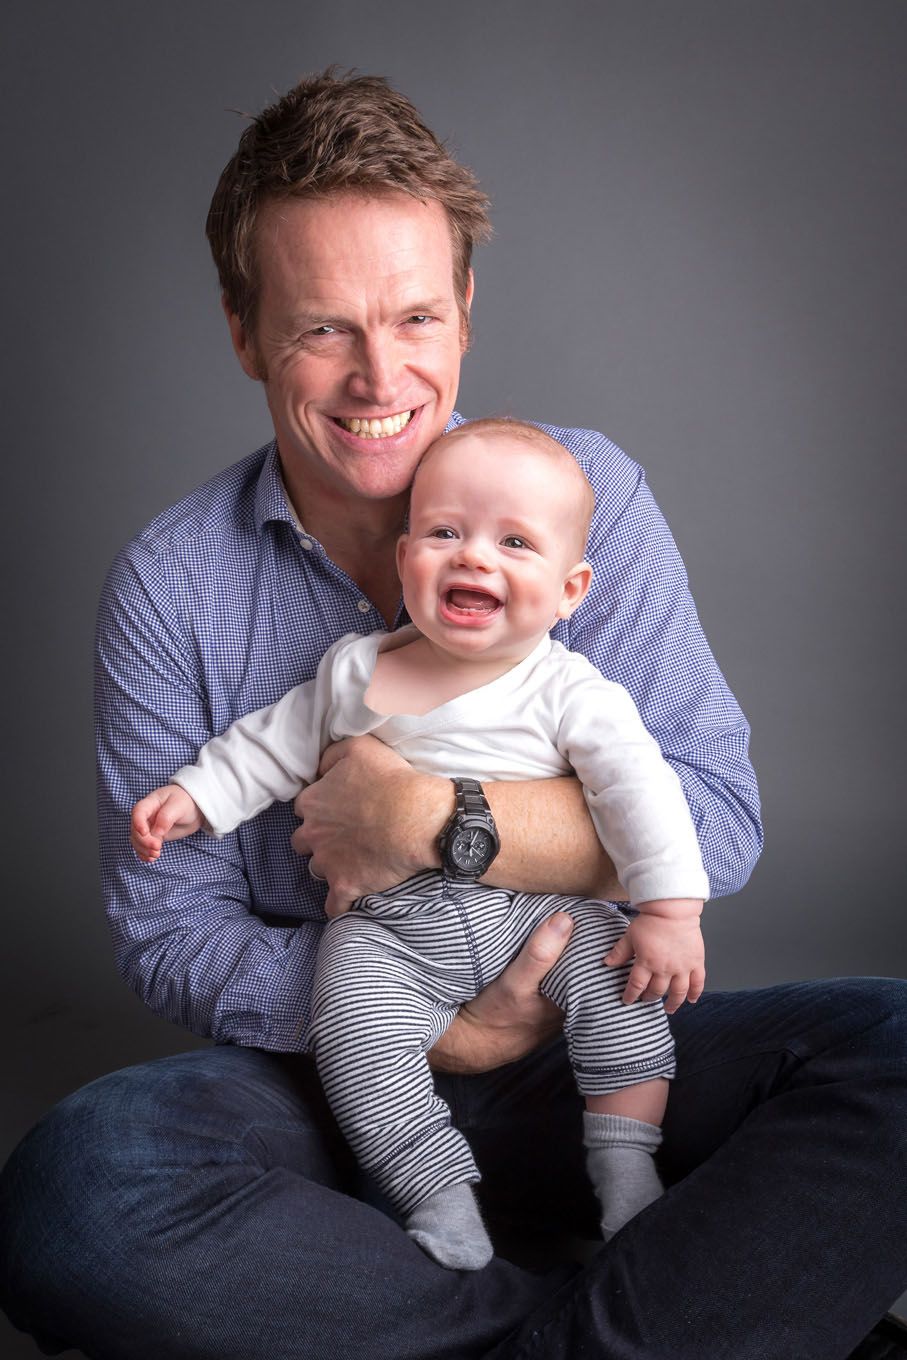 Portrait of a baby boy and his dad in a studio with backdrop and lighting equipment